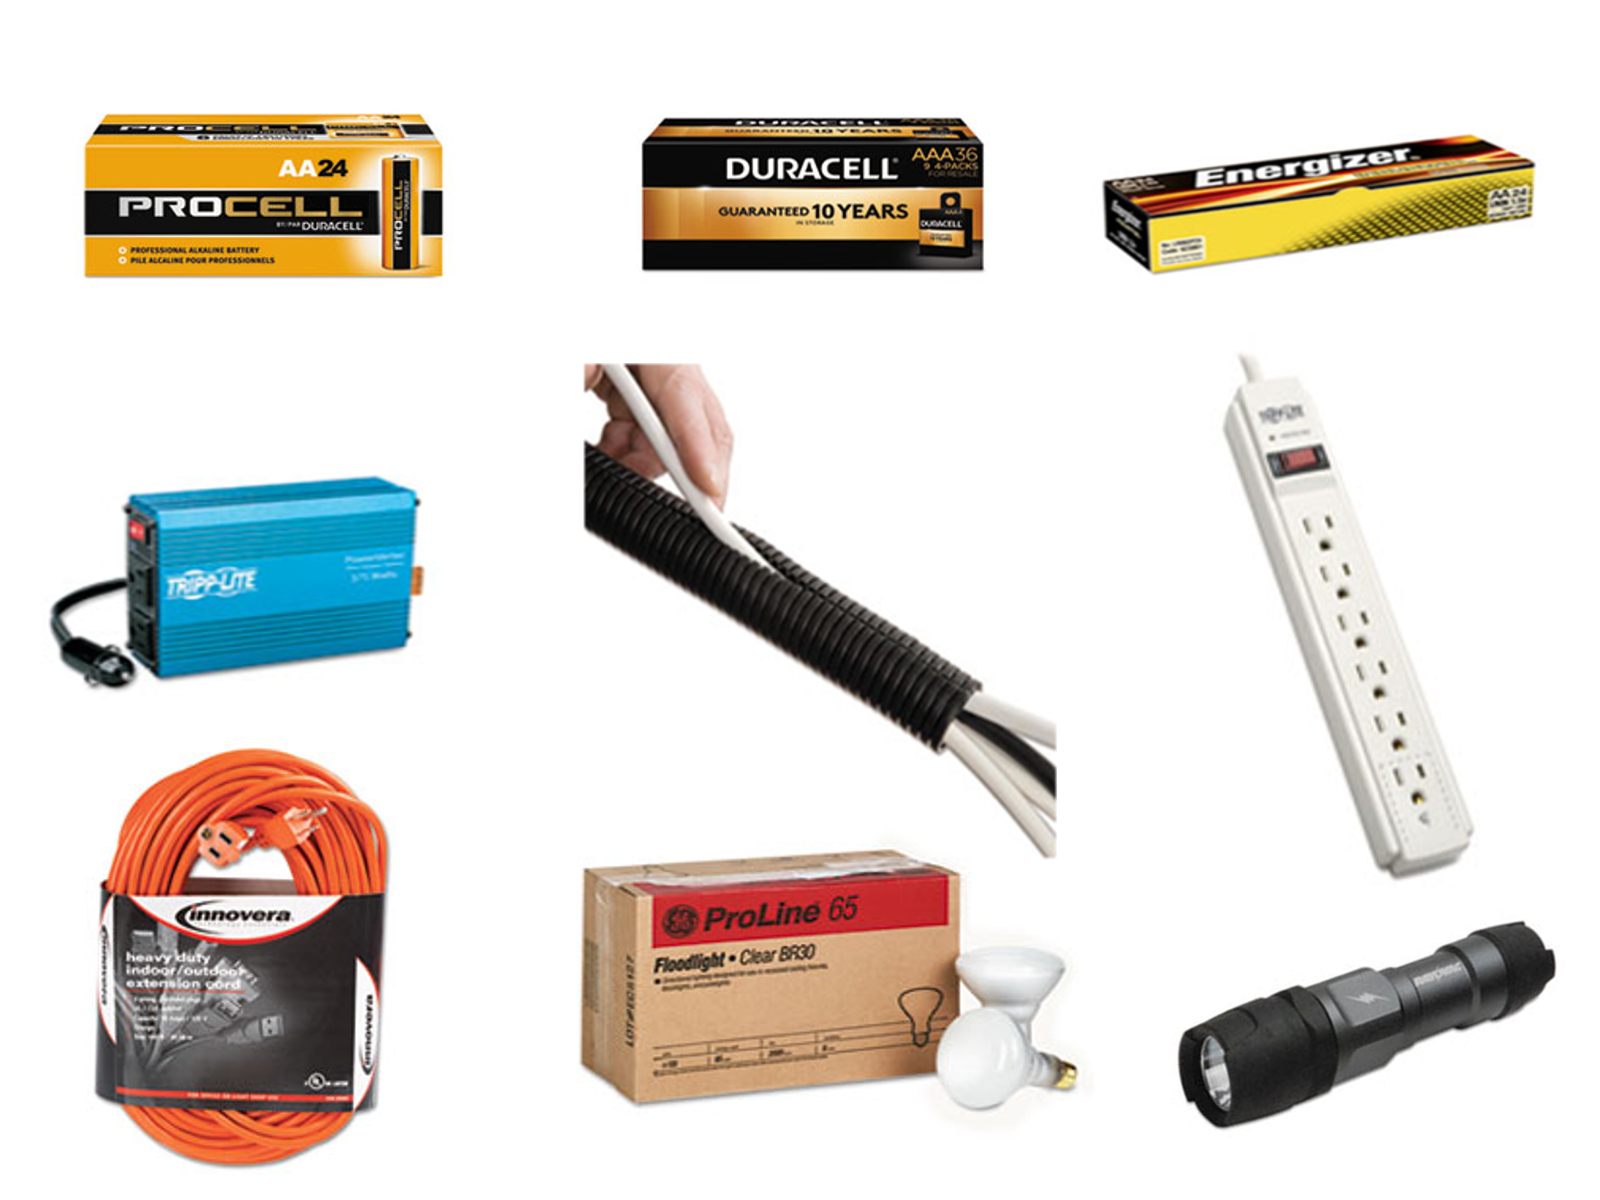 BATTERIES &amp; ELECTRICAL SUPPLIES